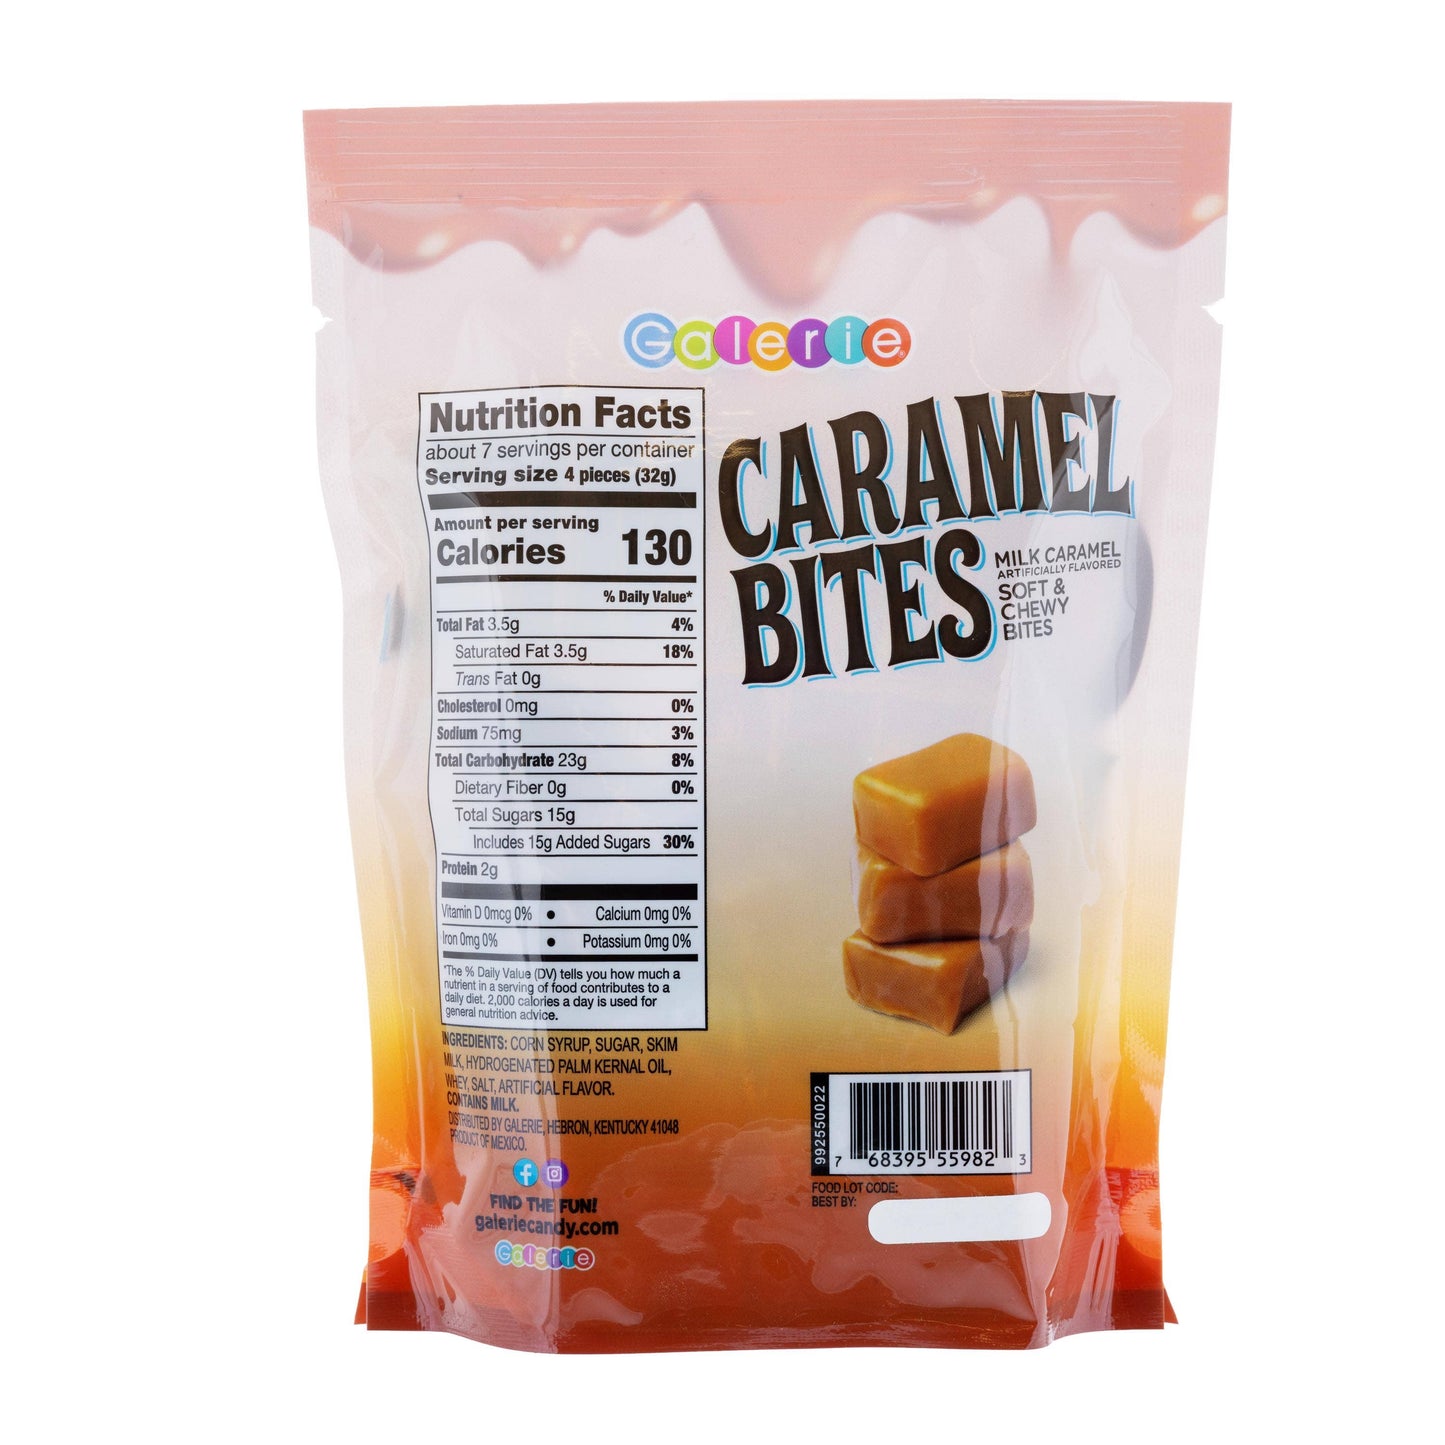 NEW! Galerie Candy Caramel Bites 8 oz - Individually Wrapped